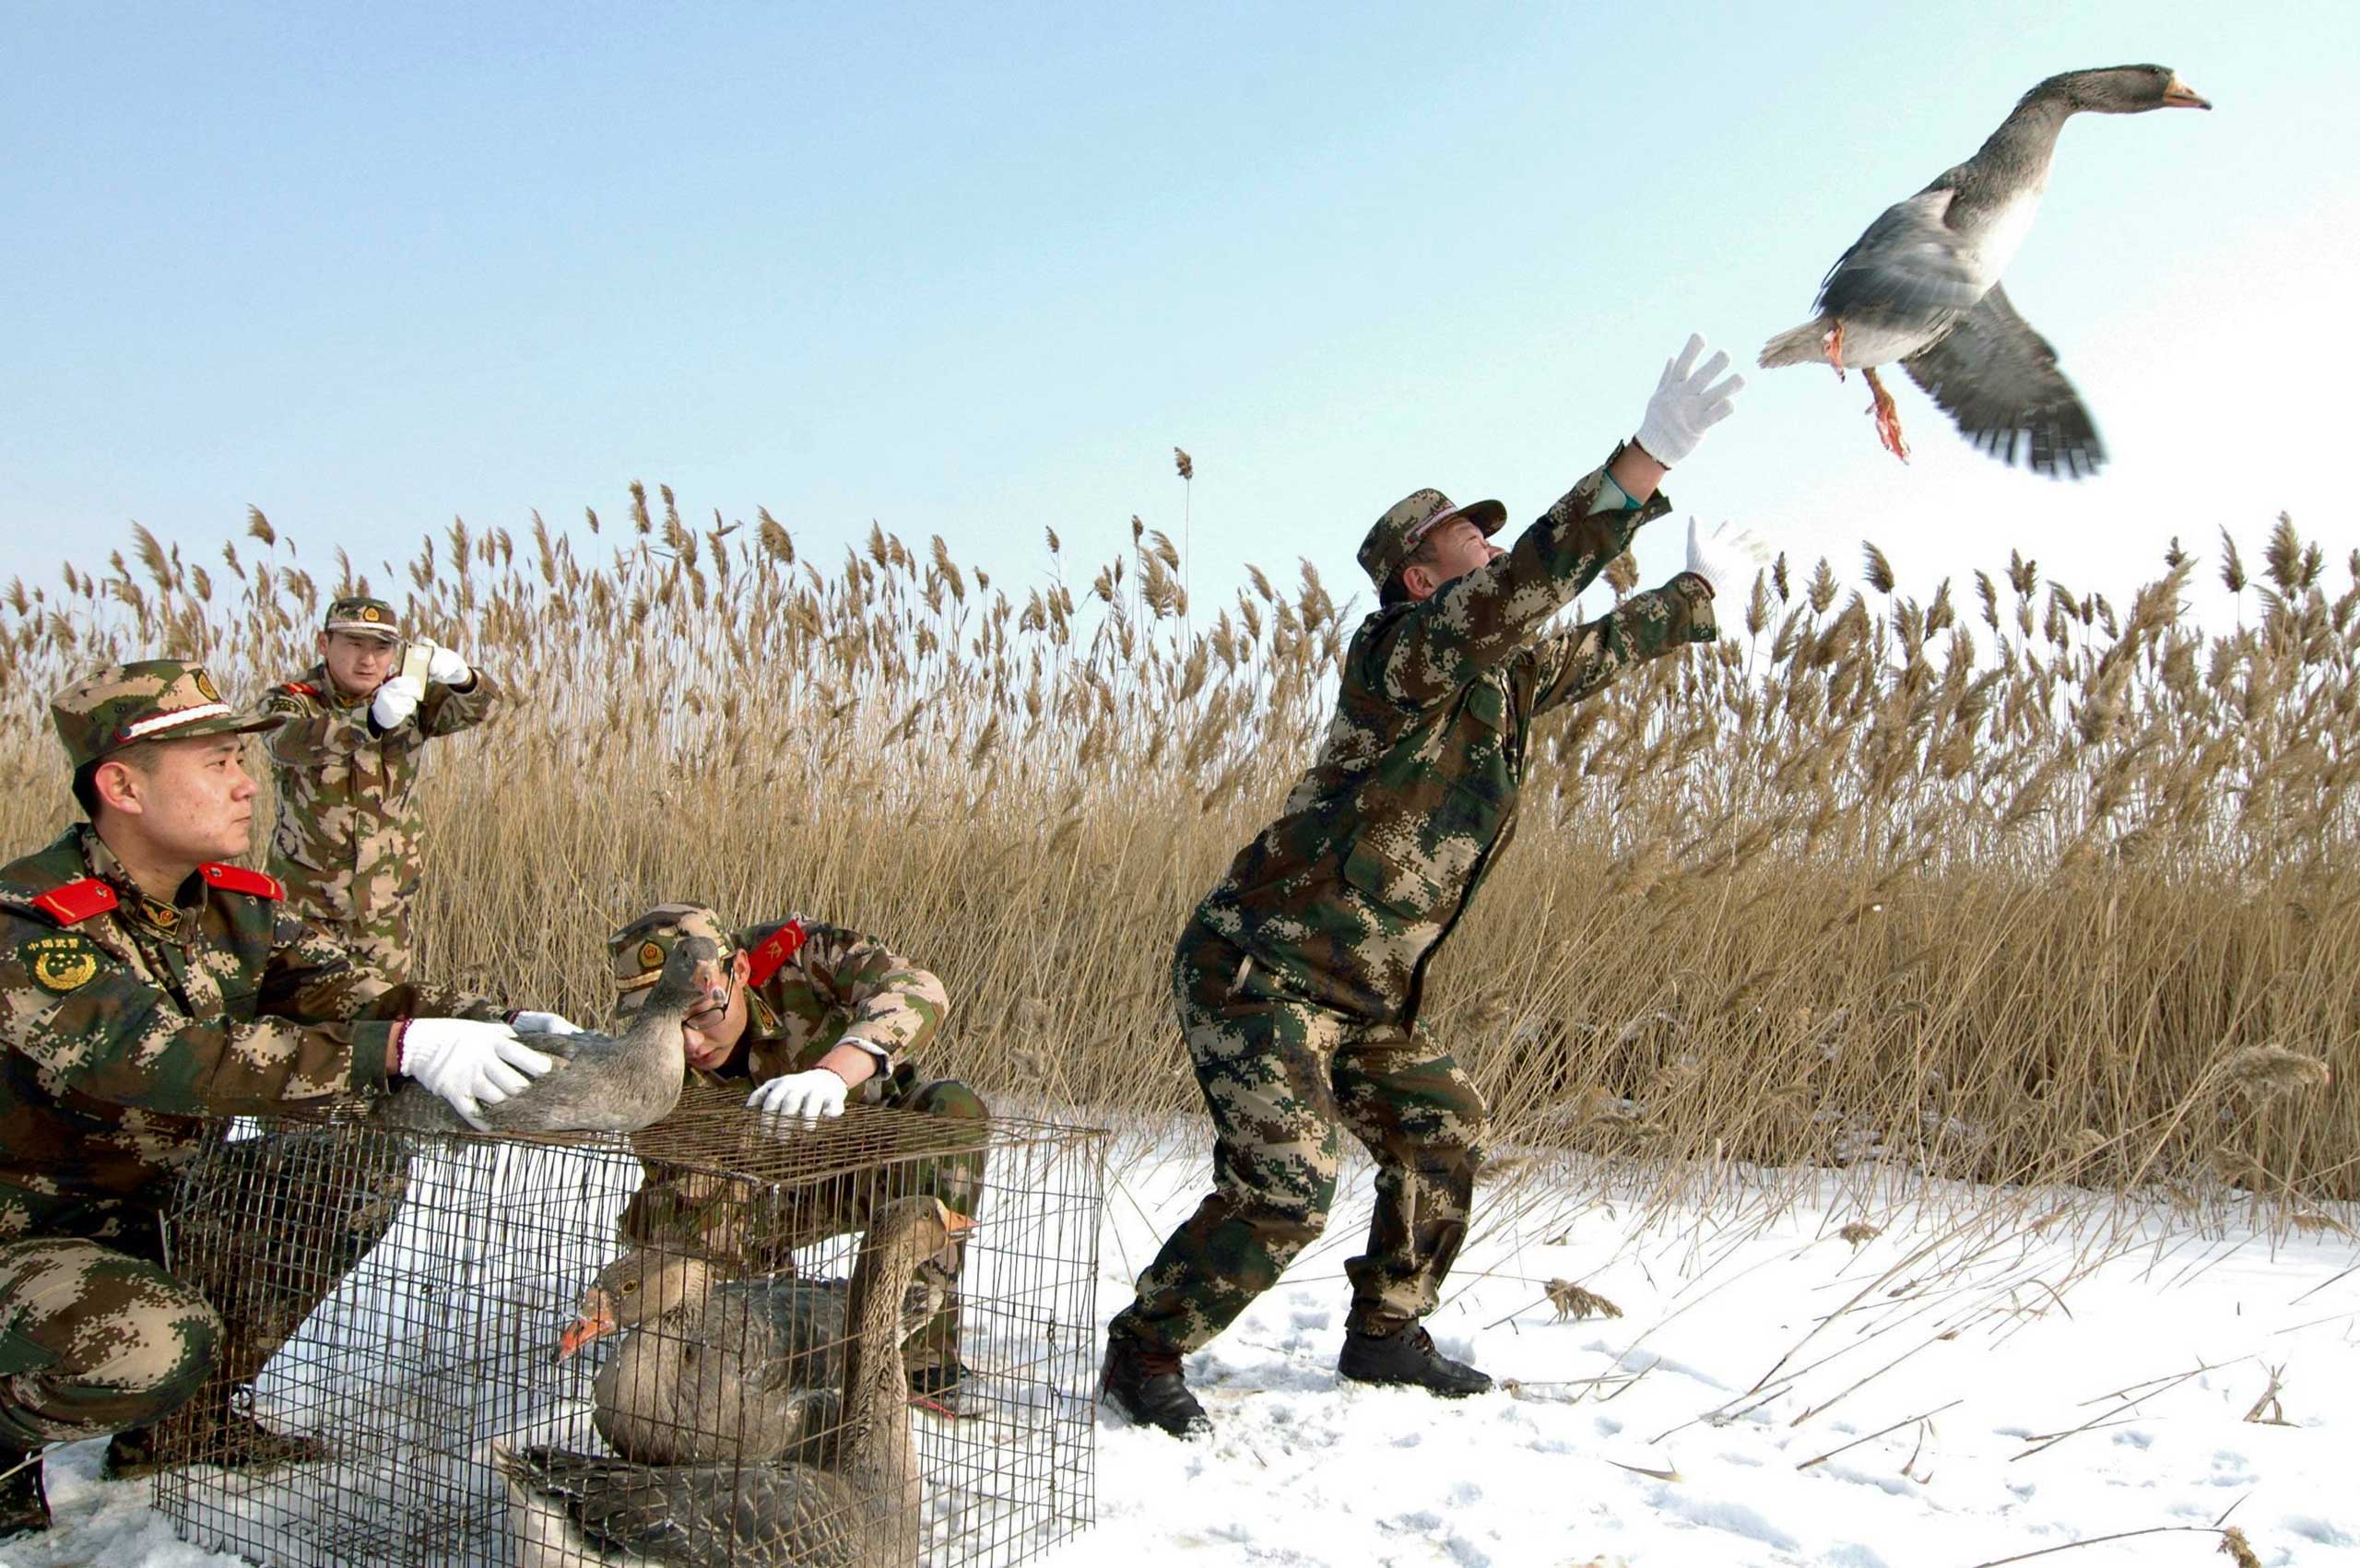 Jan. 20, 2015. A paramilitary policeman releases a wild goose in Linghai, Liaoning Province, China. About eight wild geese, which were found injured, were set free after having their wounds treated by a team of paramilitary policemen.